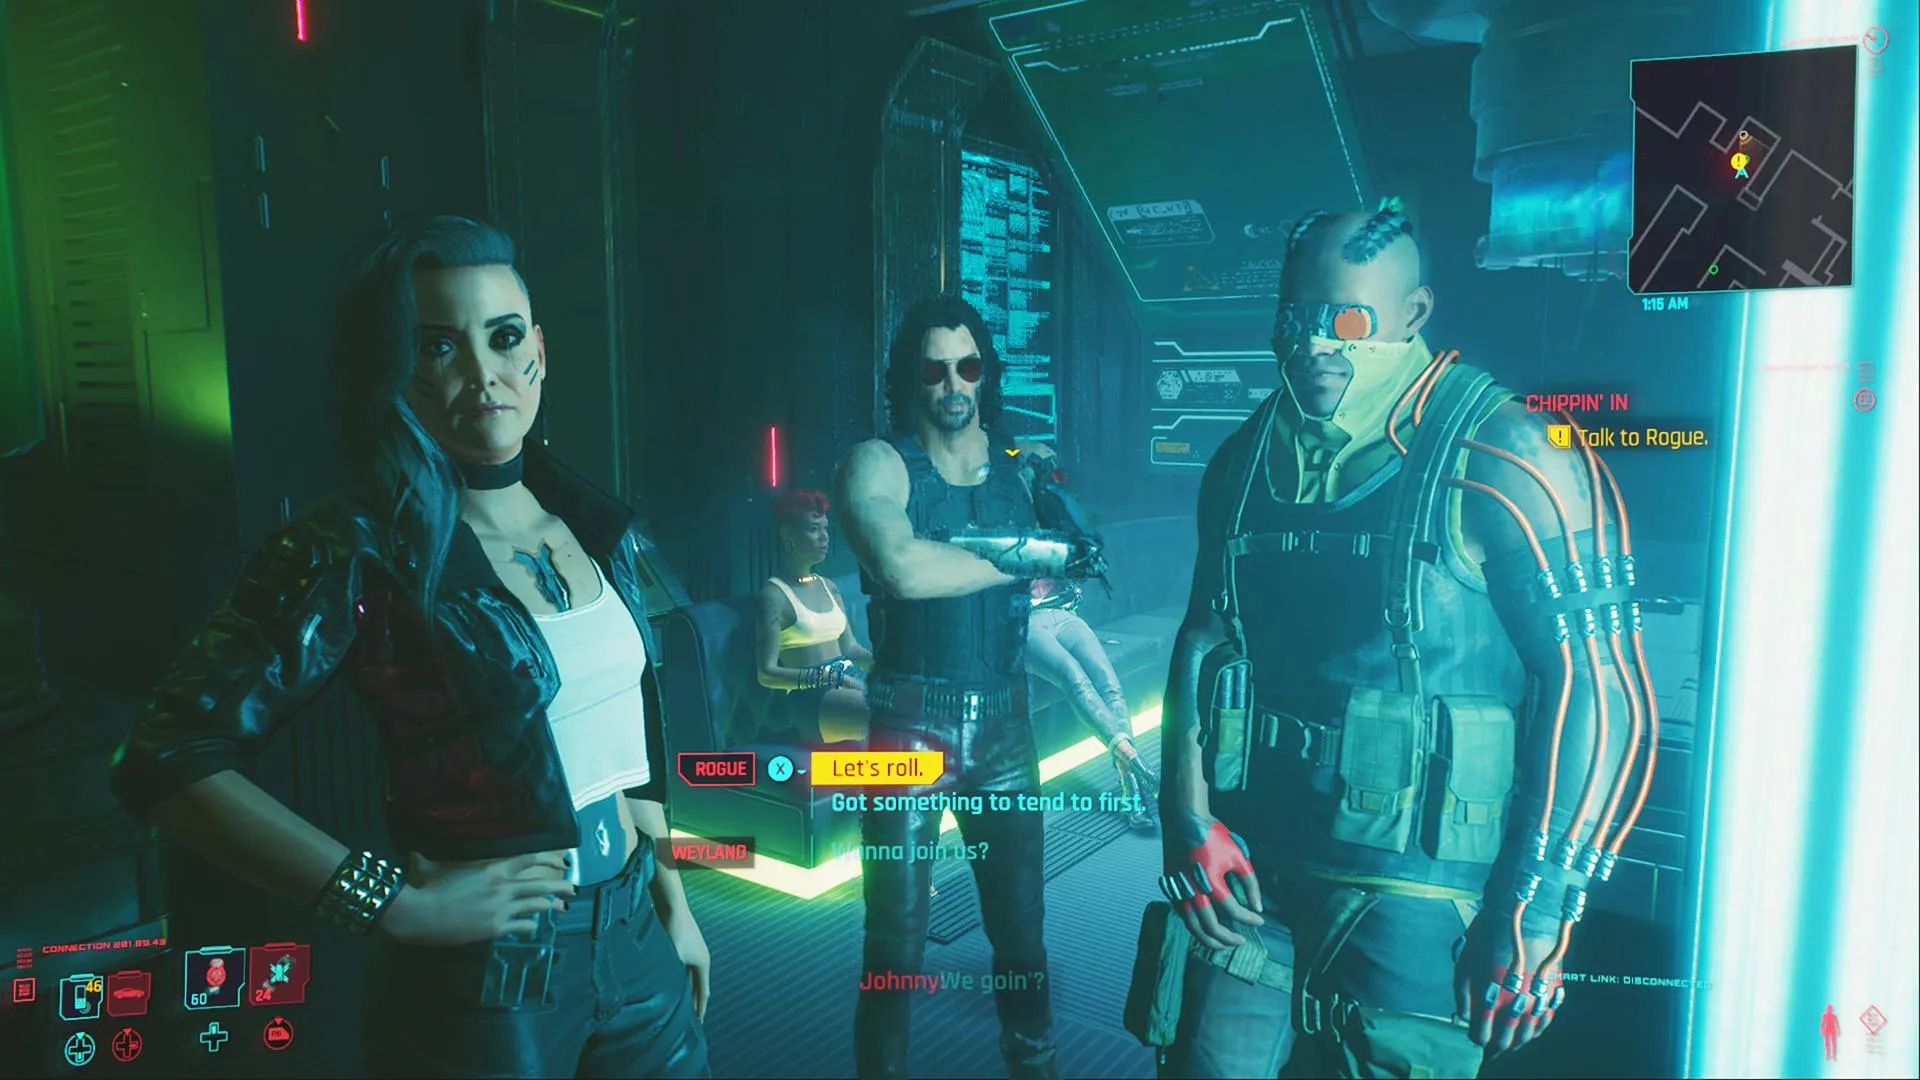 cyberpunk 2077 chippin in side job rogue in the afterlife